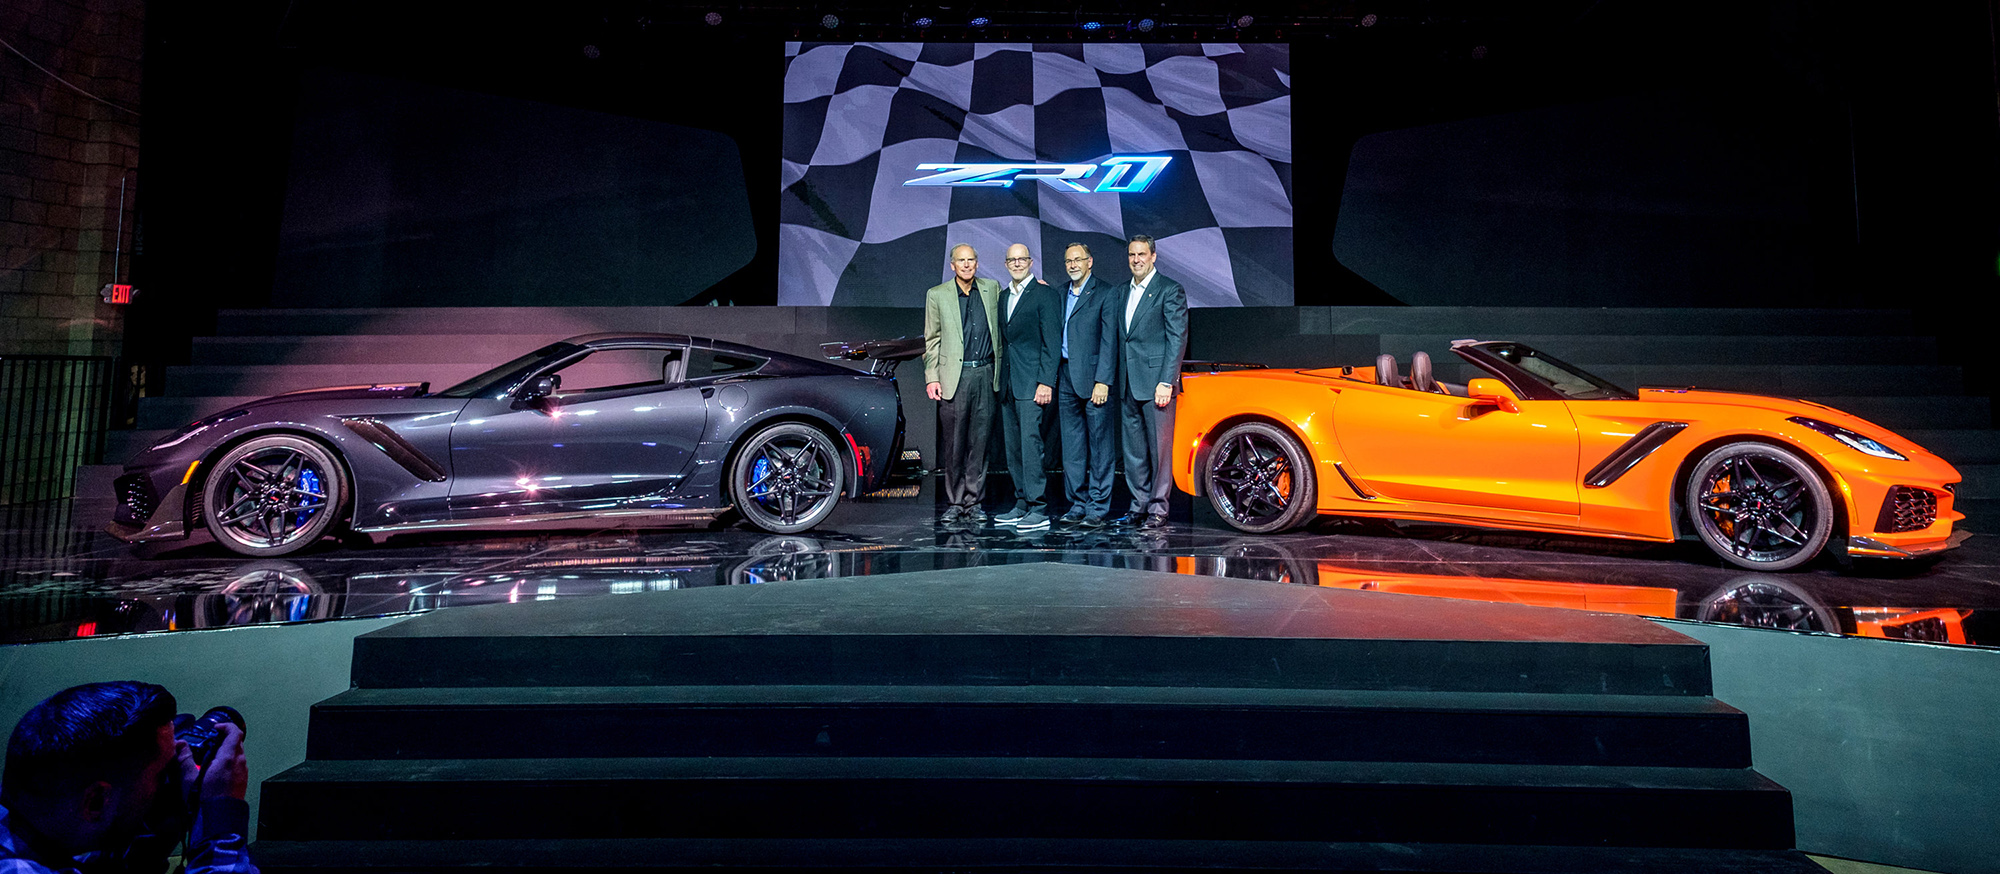 Corvette Executive Chief Engineer Tadge Juechter (l to r), Corvette Design Director Tom Peters, Corvette Design Manager Kirk Bennion and General Motors Executive Vice President Global Product Development Mark Reuss with the 2019 Corvette ZR1 (left) and the 2019 Corvette ZR1 Convertible at the convertible's world debut Tuesday, November 28, 2017 in Los Angeles, California. The Corvette ZR1s unique aero package is central to the coupes 212-mph top speed generated by the 755 horsepower LT5 6.2L supercharged engine. On sale in the spring of 2018, the ZR1 will start at $119,995 and the ZR1 convertible will start at $123,995. (Photo by Steve Fecht for Chevrolet)